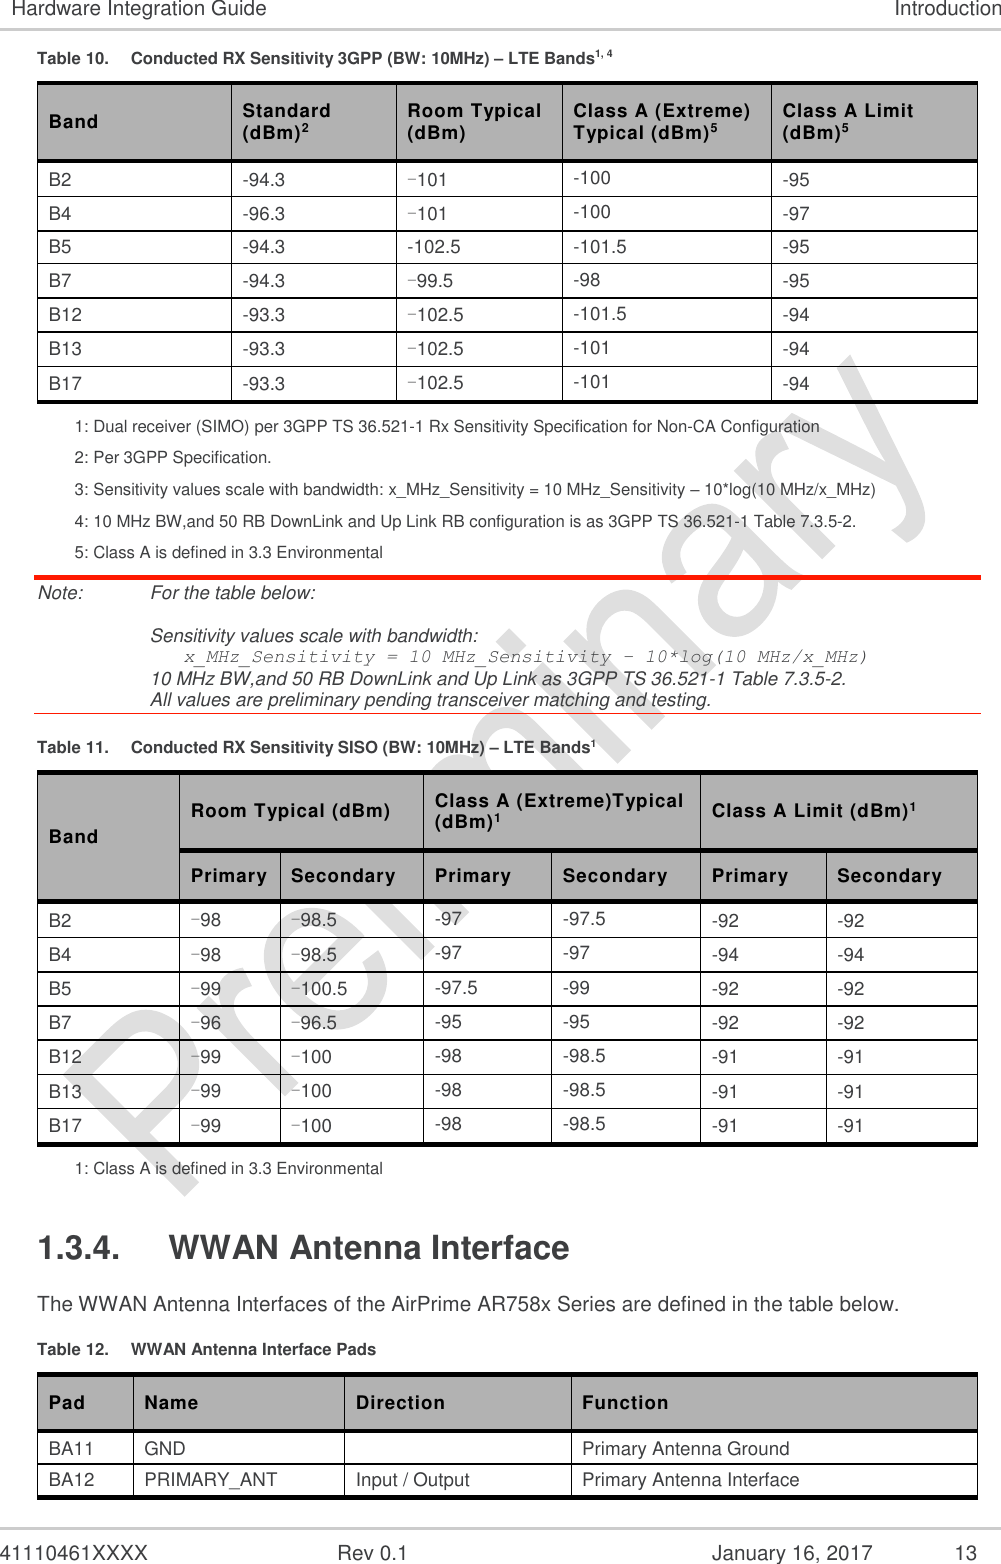  41110461XXXX  Rev 0.1  January 16, 2017  13 Hardware Integration Guide Introduction Table 10.  Conducted RX Sensitivity 3GPP (BW: 10MHz) – LTE Bands1, 4 Band Standard (dBm)2 Room Typical (dBm) Class A (Extreme) Typical (dBm)5 Class A Limit  (dBm)5 B2 -94.3 -101 -100 -95 B4 -96.3 -101 -100 -97 B5 -94.3 -102.5 -101.5 -95 B7 -94.3 -99.5 -98 -95 B12 -93.3 -102.5 -101.5 -94 B13 -93.3 -102.5 -101 -94 B17 -93.3 -102.5 -101 -94 1: Dual receiver (SIMO) per 3GPP TS 36.521-1 Rx Sensitivity Specification for Non-CA Configuration 2: Per 3GPP Specification. 3: Sensitivity values scale with bandwidth: x_MHz_Sensitivity = 10 MHz_Sensitivity – 10*log(10 MHz/x_MHz) 4: 10 MHz BW,and 50 RB DownLink and Up Link RB configuration is as 3GPP TS 36.521-1 Table 7.3.5-2. 5: Class A is defined in 3.3 Environmental Note:   For the table below:  Sensitivity values scale with bandwidth:    x_MHz_Sensitivity = 10 MHz_Sensitivity – 10*log(10 MHz/x_MHz) 10 MHz BW,and 50 RB DownLink and Up Link as 3GPP TS 36.521-1 Table 7.3.5-2. All values are preliminary pending transceiver matching and testing. Table 11.  Conducted RX Sensitivity SISO (BW: 10MHz) – LTE Bands1 Band Room Typical (dBm) Class A (Extreme)Typical (dBm)1 Class A Limit (dBm)1 Primary Secondary Primary Secondary Primary Secondary B2 -98 -98.5 -97 -97.5 -92 -92 B4 -98 -98.5 -97 -97 -94 -94 B5 -99 -100.5 -97.5 -99 -92 -92 B7 -96 -96.5 -95 -95 -92 -92 B12 -99 -100 -98 -98.5 -91 -91 B13 -99 -100 -98 -98.5 -91 -91 B17 -99 -100 -98 -98.5 -91 -91 1: Class A is defined in 3.3 Environmental 1.3.4.  WWAN Antenna Interface The WWAN Antenna Interfaces of the AirPrime AR758x Series are defined in the table below. Table 12.  WWAN Antenna Interface Pads Pad Name Direction Function BA11 GND   Primary Antenna Ground BA12 PRIMARY_ANT Input / Output Primary Antenna Interface 